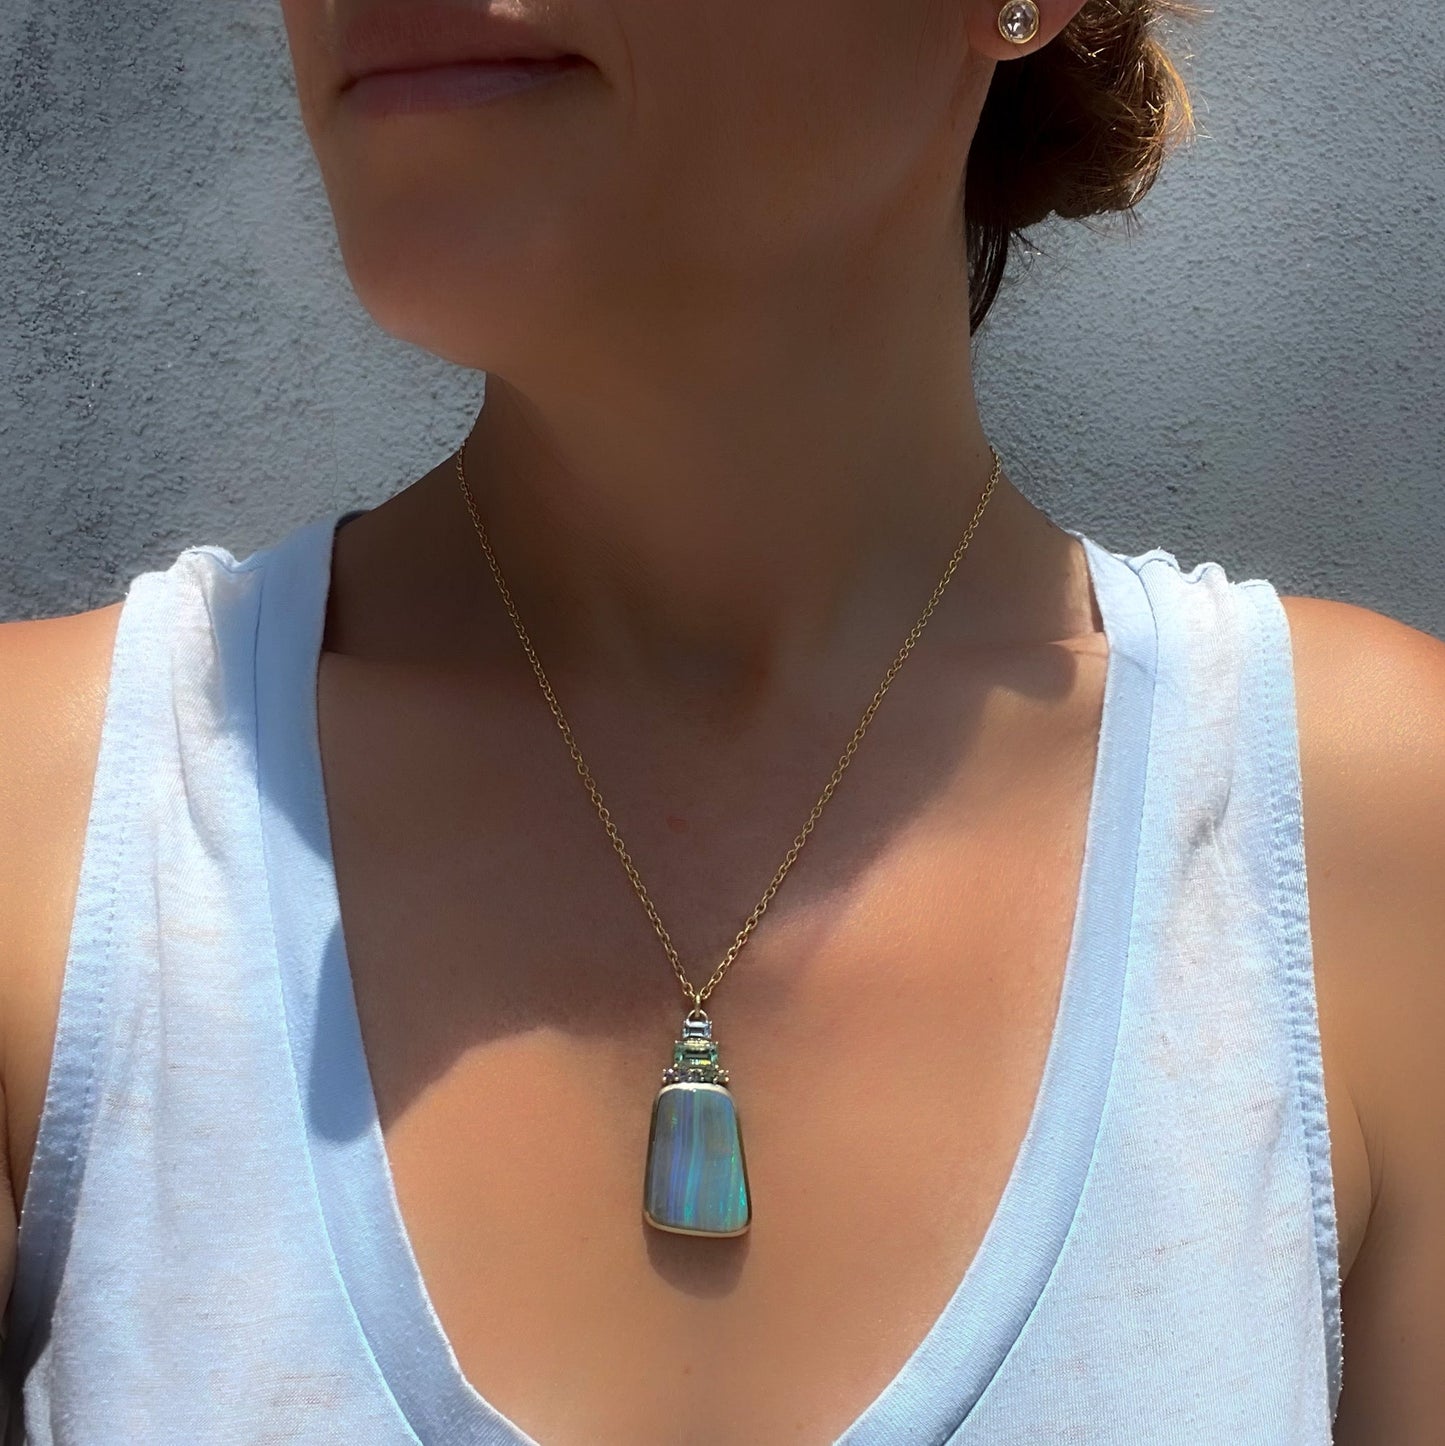 A model wearing an Australian Opal Necklace by NIXIN Jewelry. Gold opal necklace made with emerald, opal and sapphires.